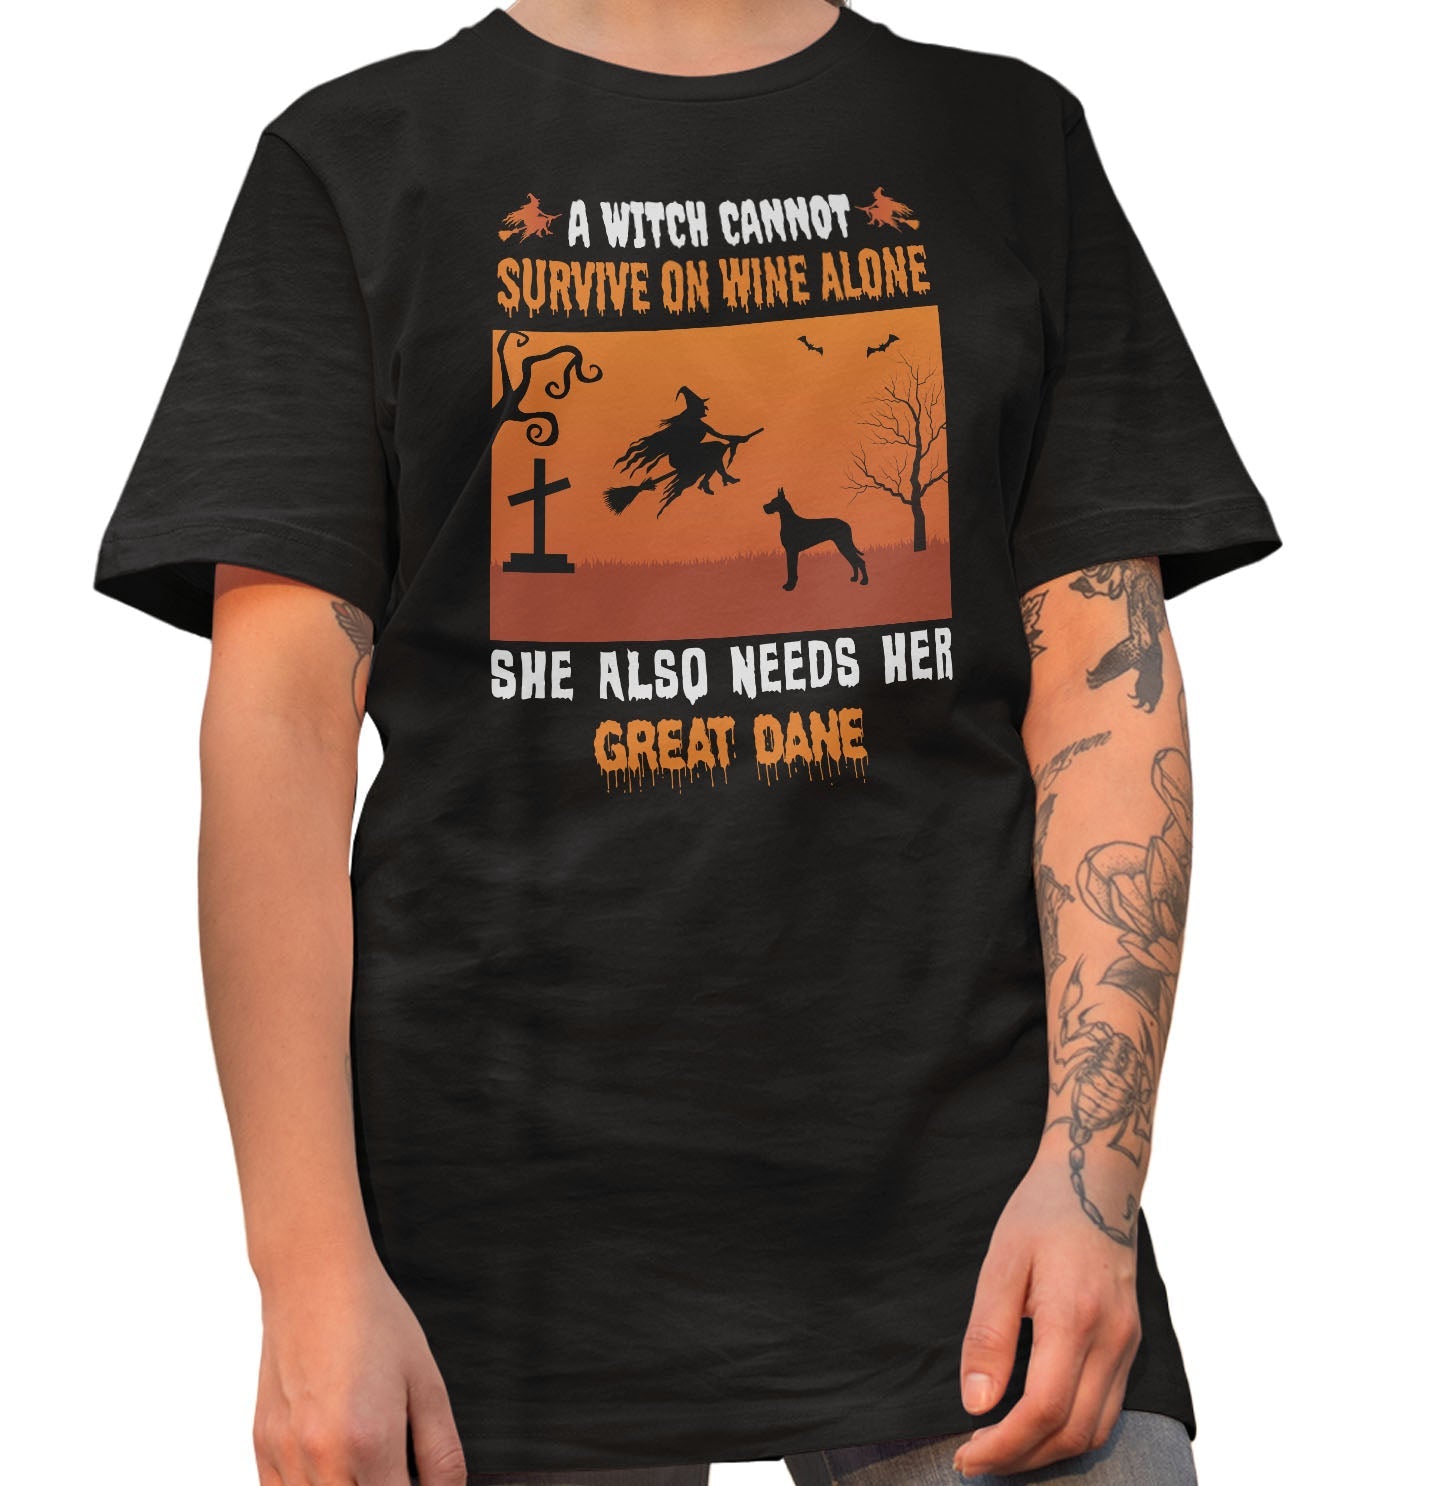 A Witch Needs Her Great Dane - Adult Unisex T-Shirt